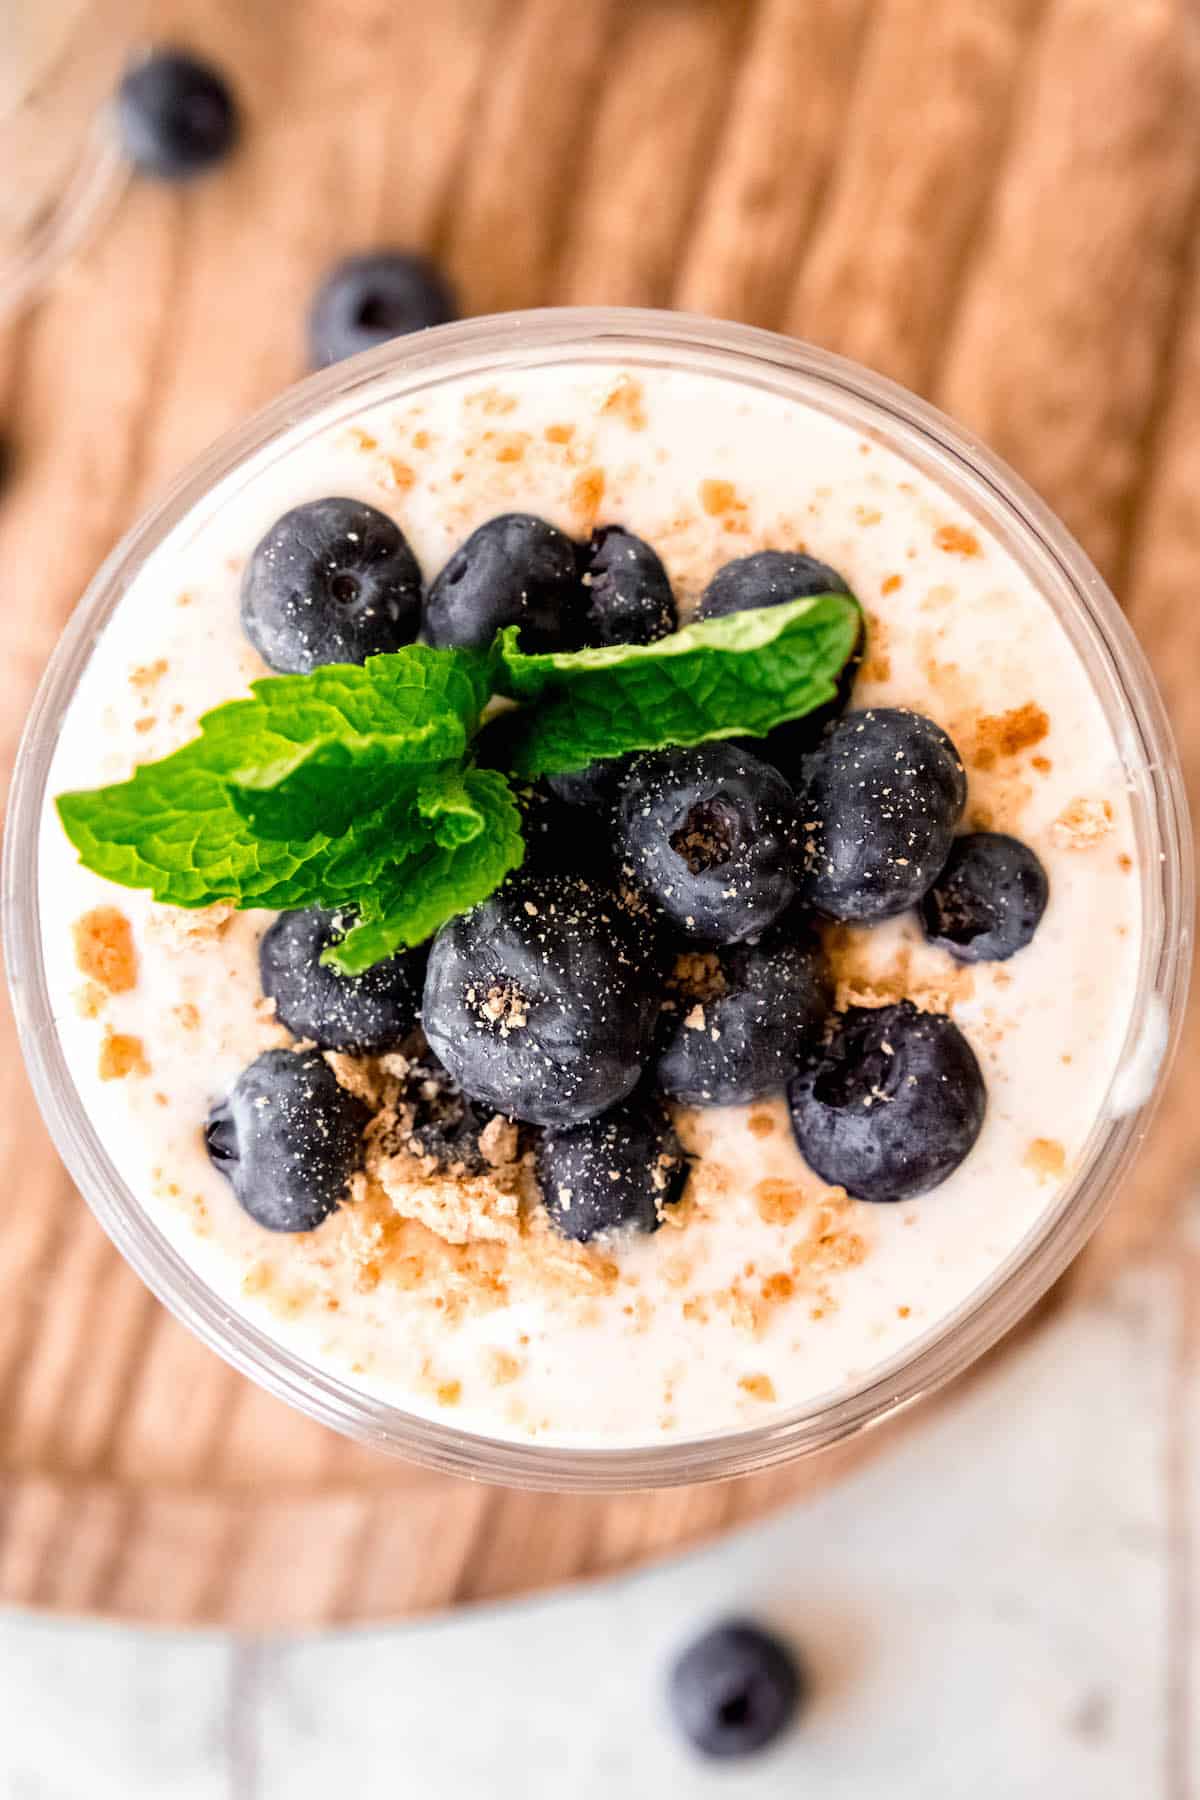 flat lay shot of the high-protein overnight oats showing the cheesecake layer topped with fresh blueberries, graham cracker crumbs, and a sprig of mint.